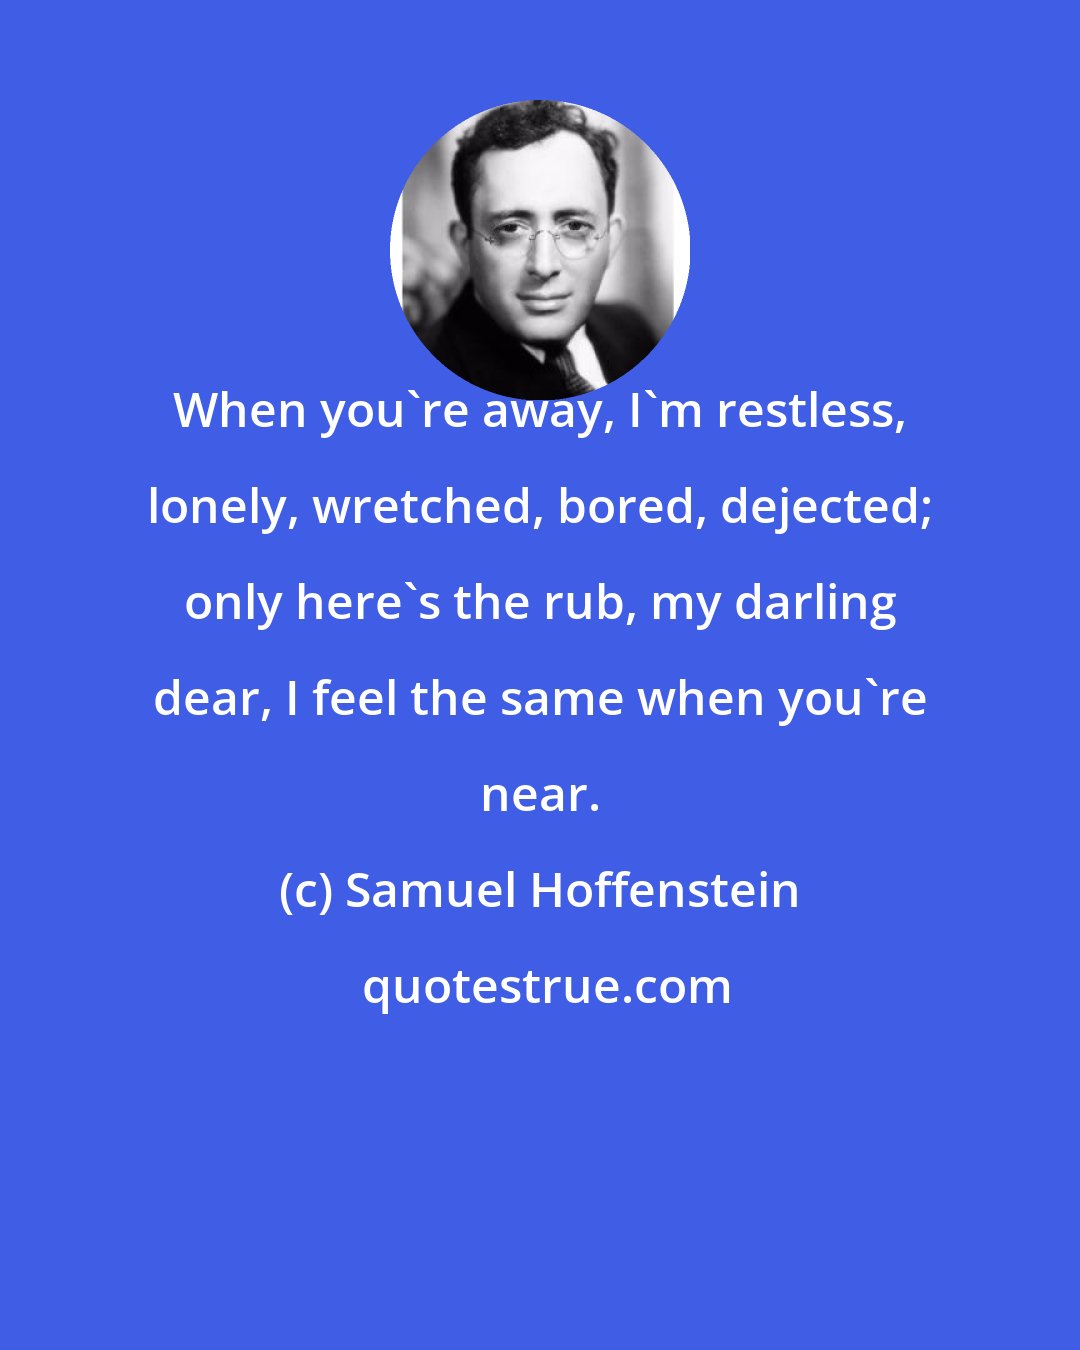 Samuel Hoffenstein: When you're away, I'm restless, lonely, wretched, bored, dejected; only here's the rub, my darling dear, I feel the same when you're near.